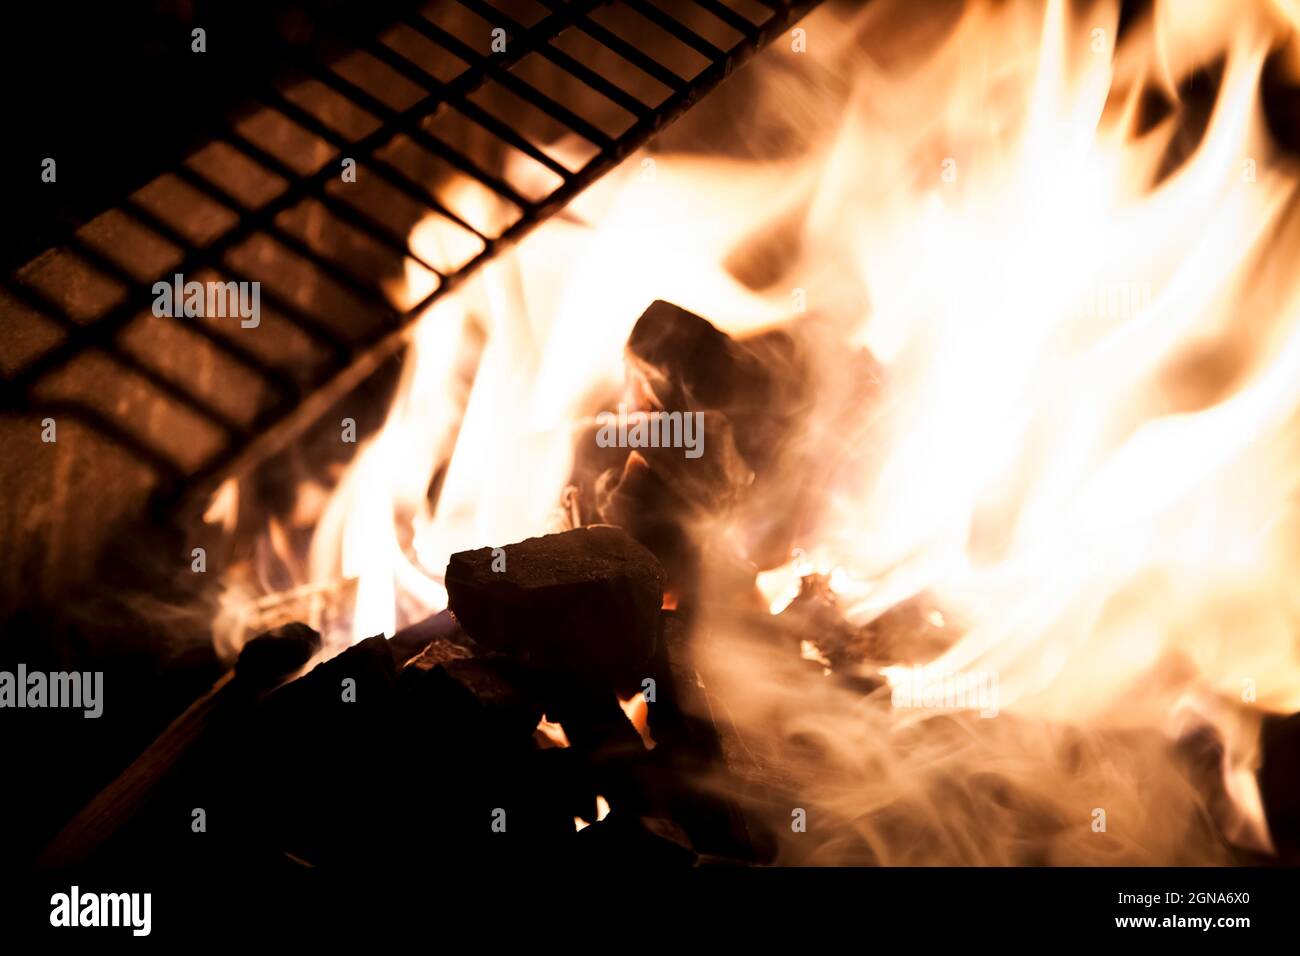 https://c8.alamy.com/comp/2GNA6X0/close-up-of-fire-on-grill-flames-bbq-hot-fire-cooking-2GNA6X0.jpg